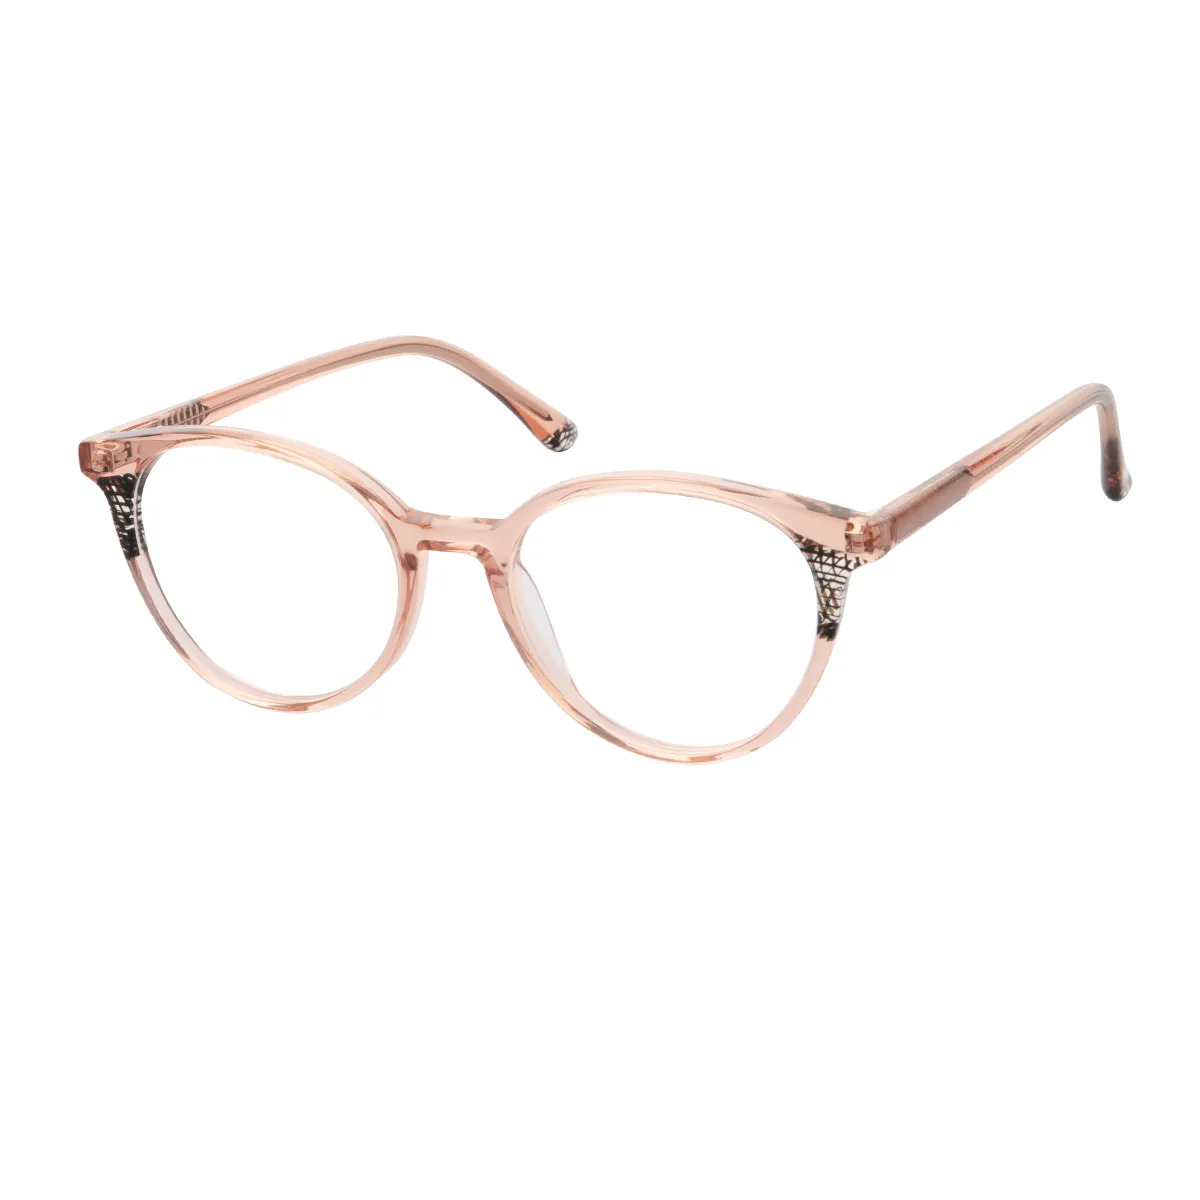 Aemy - Round Brown Glasses for Women - EFE